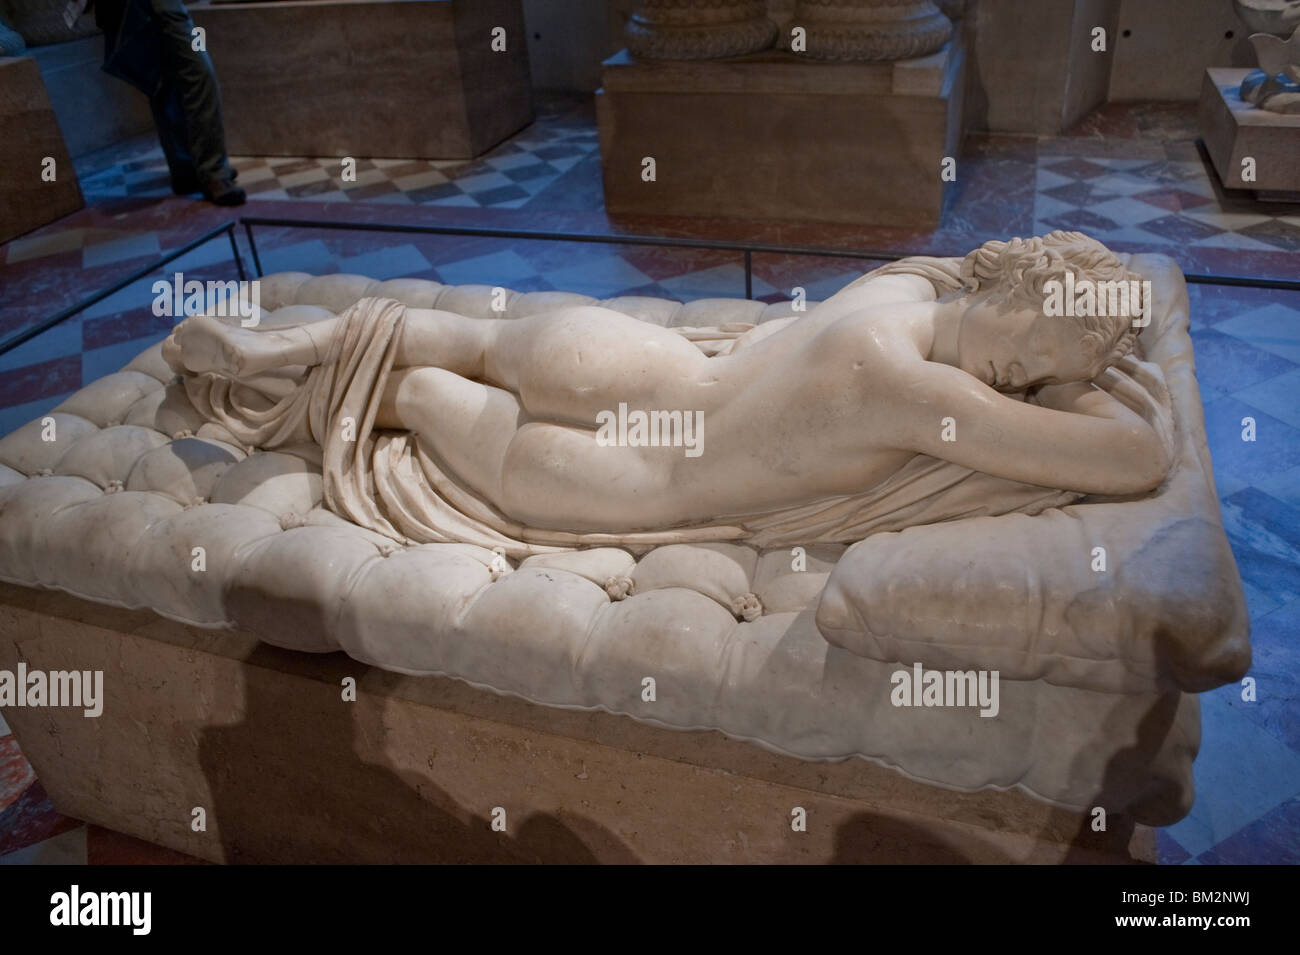 Statue of a Greek Goddess, "Hermaphrodite Endormi", in Louvre Museum,  Paris, France, sexuality and body, Marble Female Nude Stock Photo - Alamy